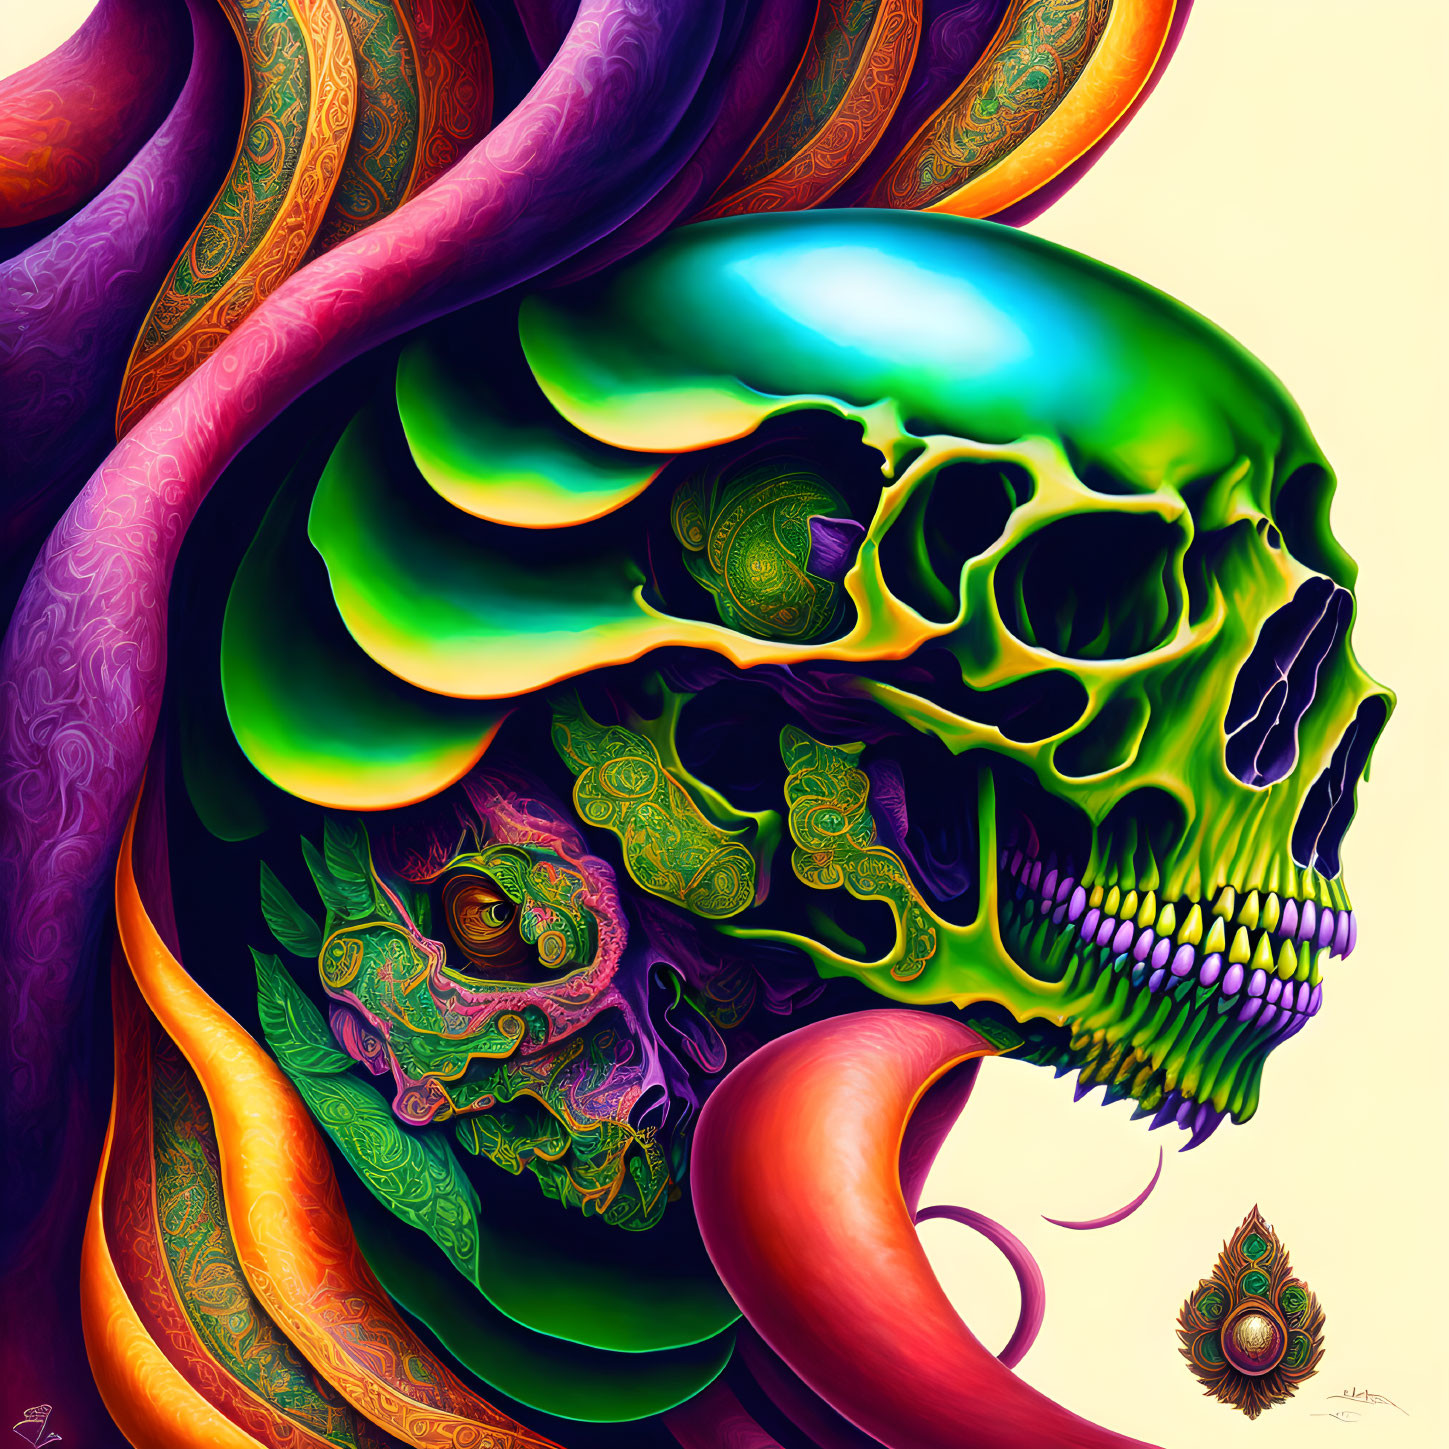 Neon-colored skull with intricate patterns and psychedelic tentacles